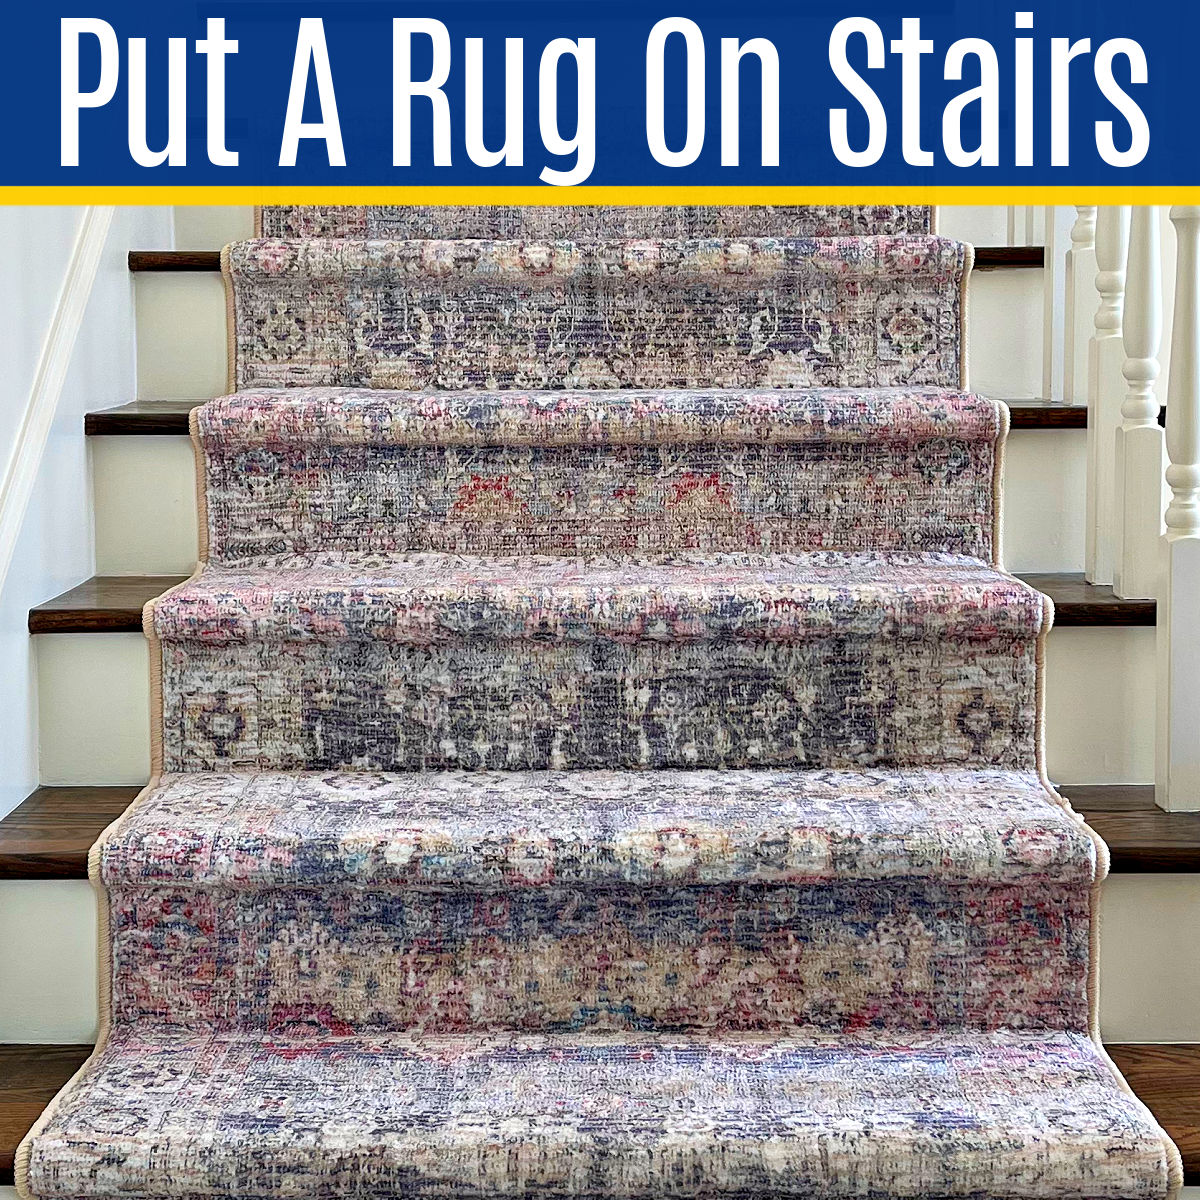 https://www.abbottsathome.com/wp-content/uploads/2023/04/How-To-Put-An-Area-Rug-On-Stairs-2.jpg